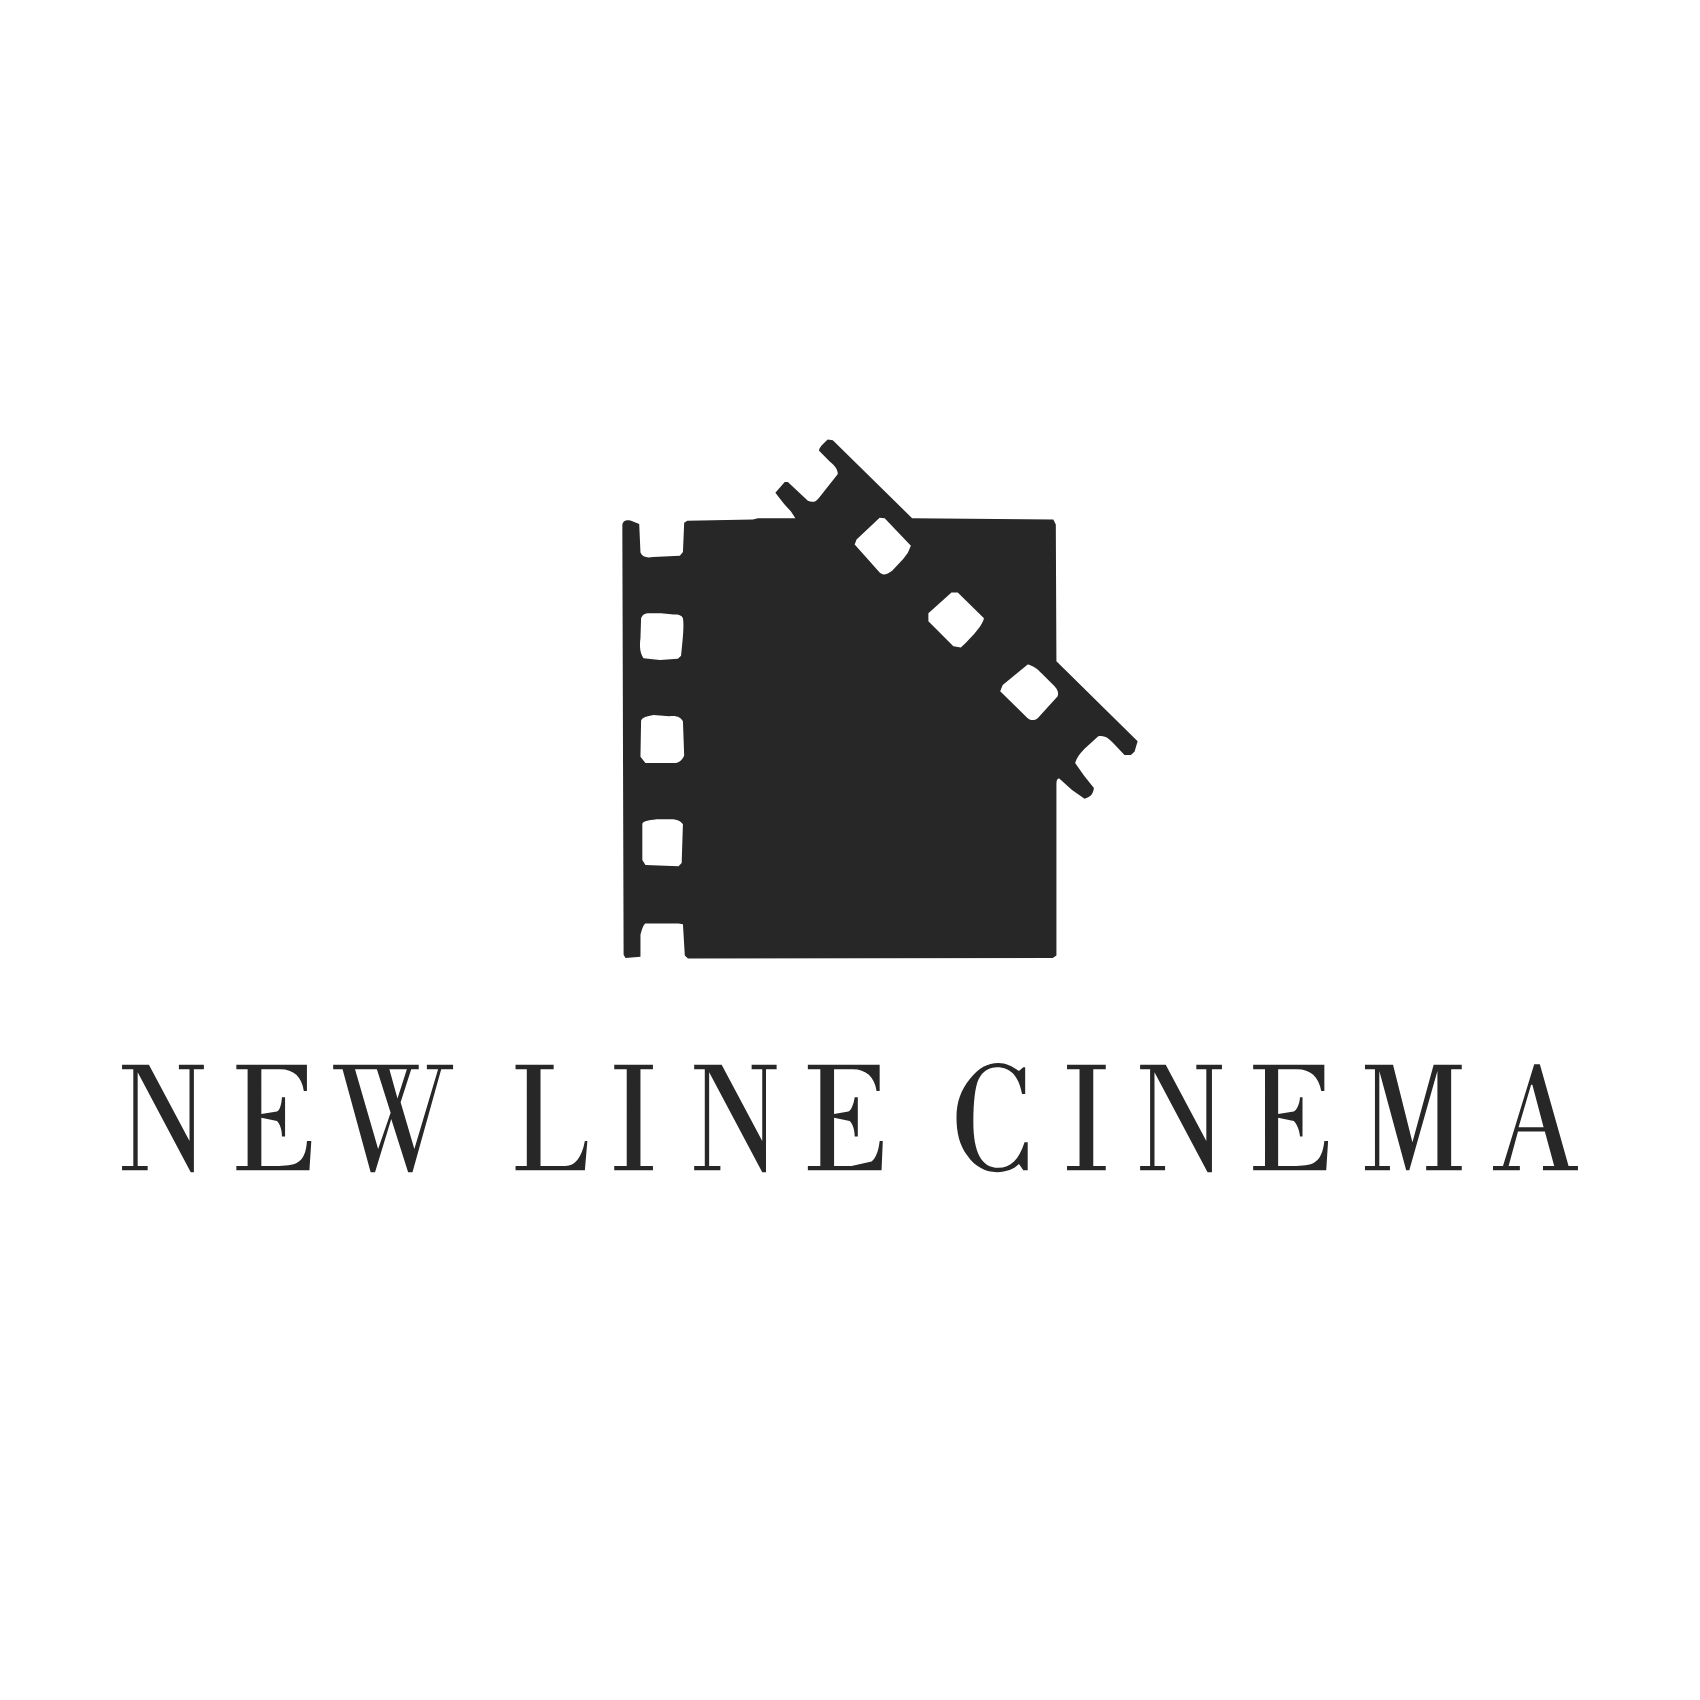 Download New line Cinema Logo PNG and Vector (PDF, SVG, Ai, EPS) Free